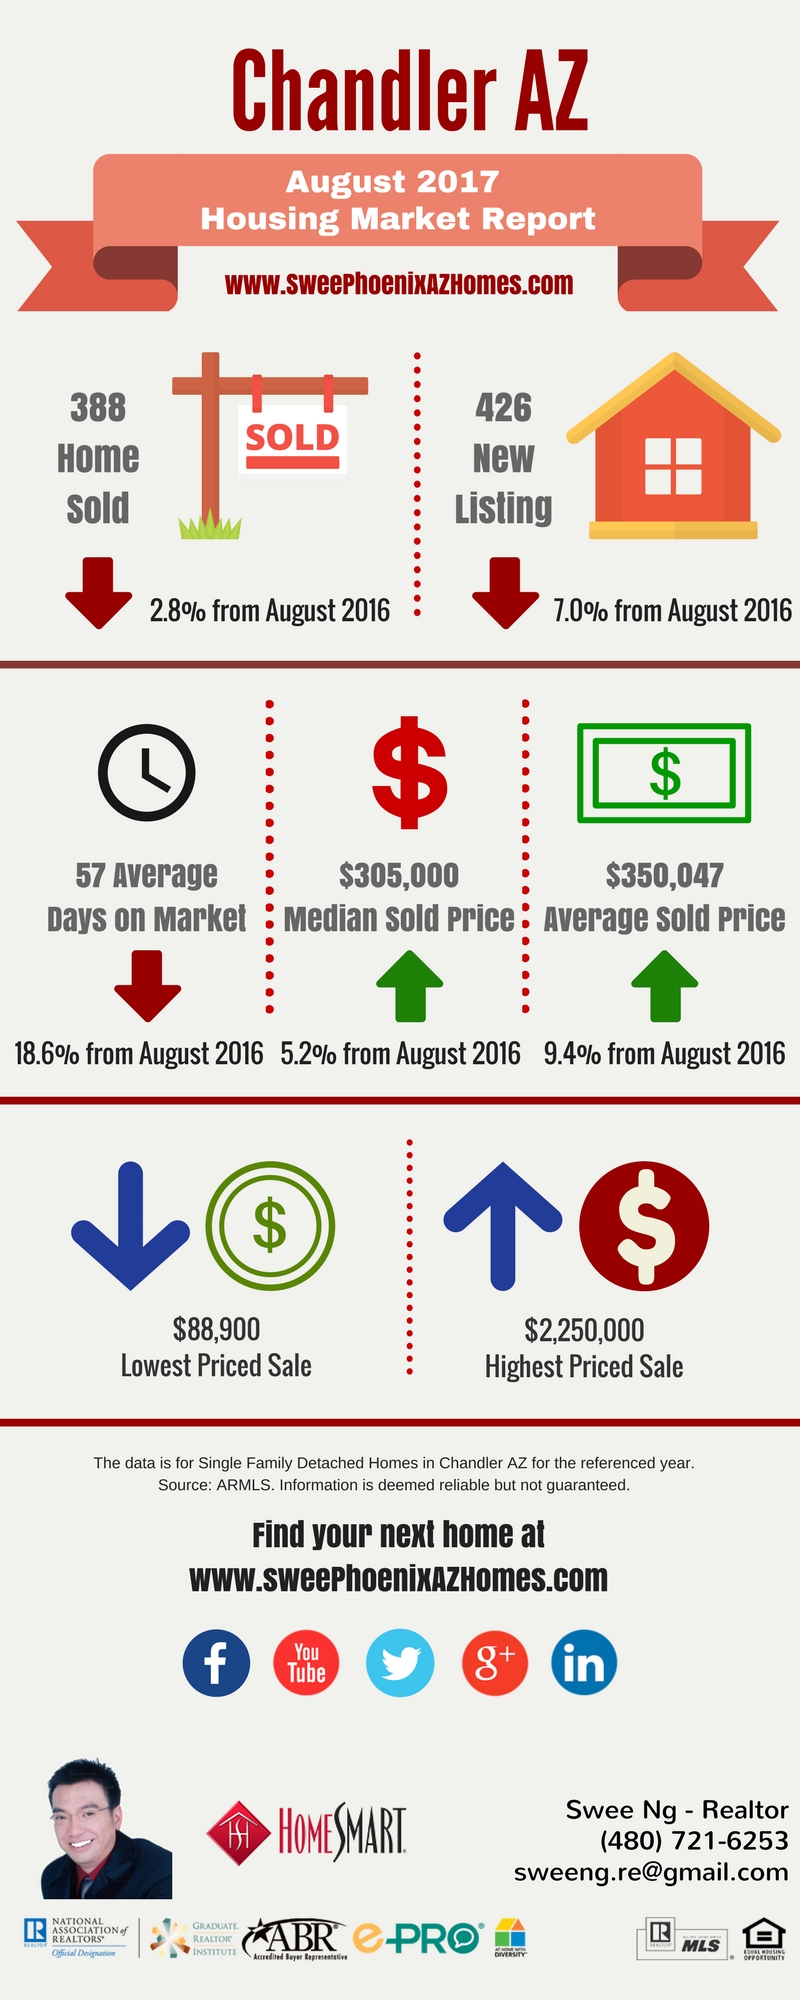 Chandler AZ Housing Market Update August 2017 by Swee Ng, House Value and Real Estate Listings